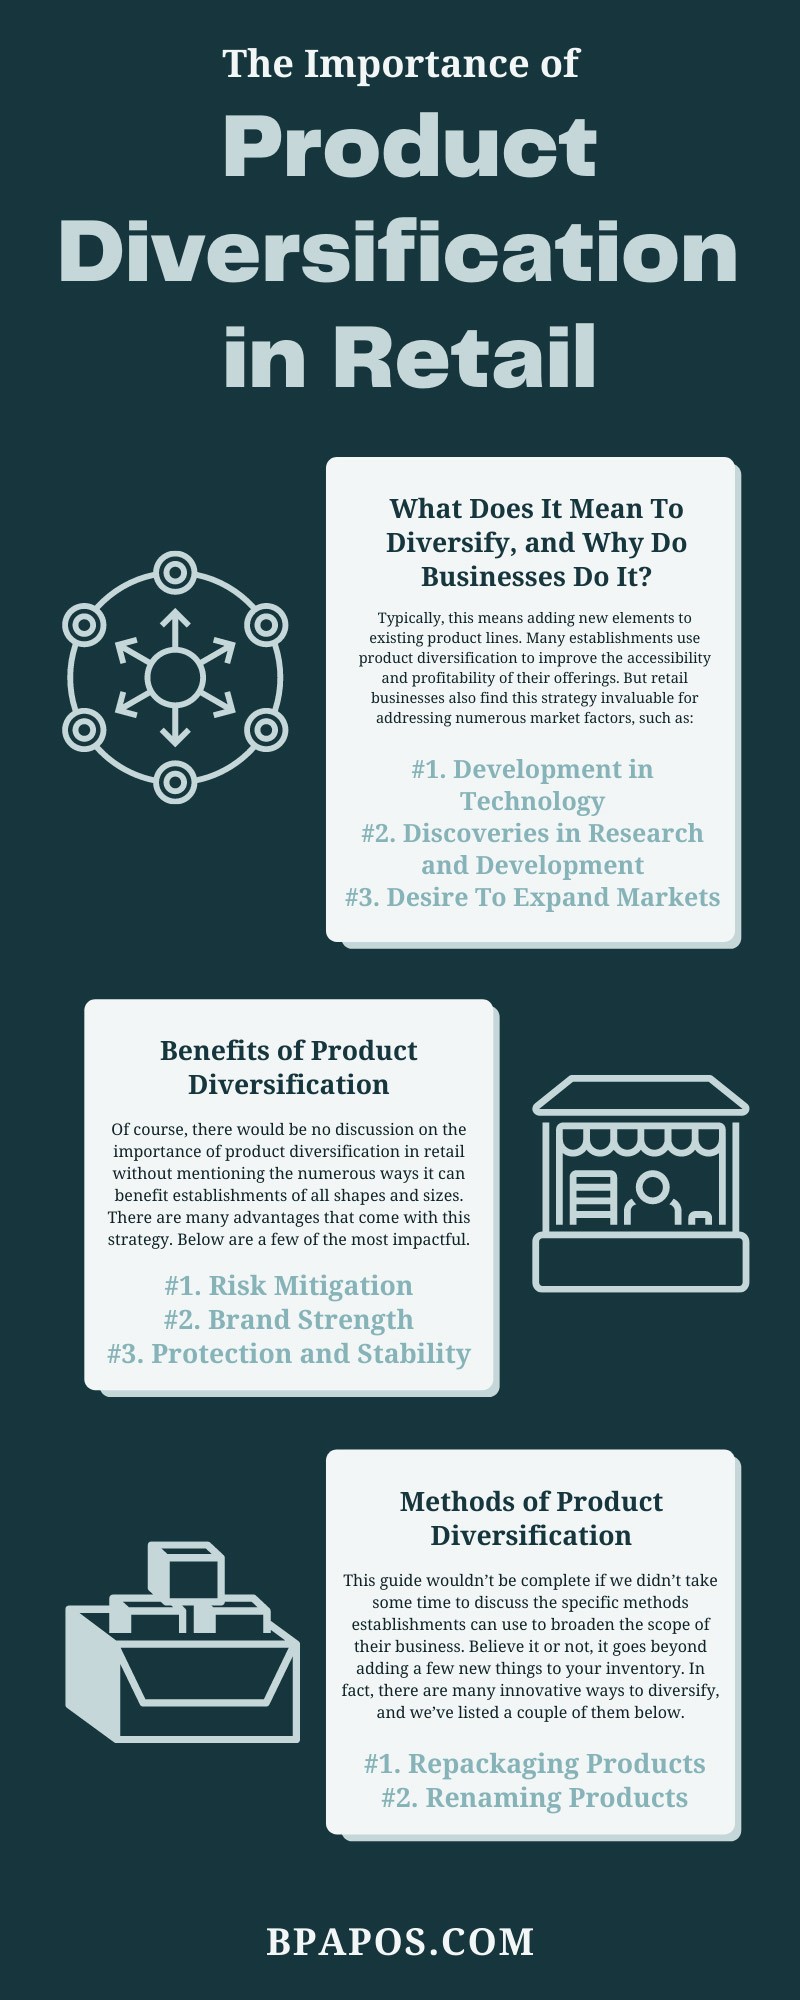 Product Diversification in Retail Infographic